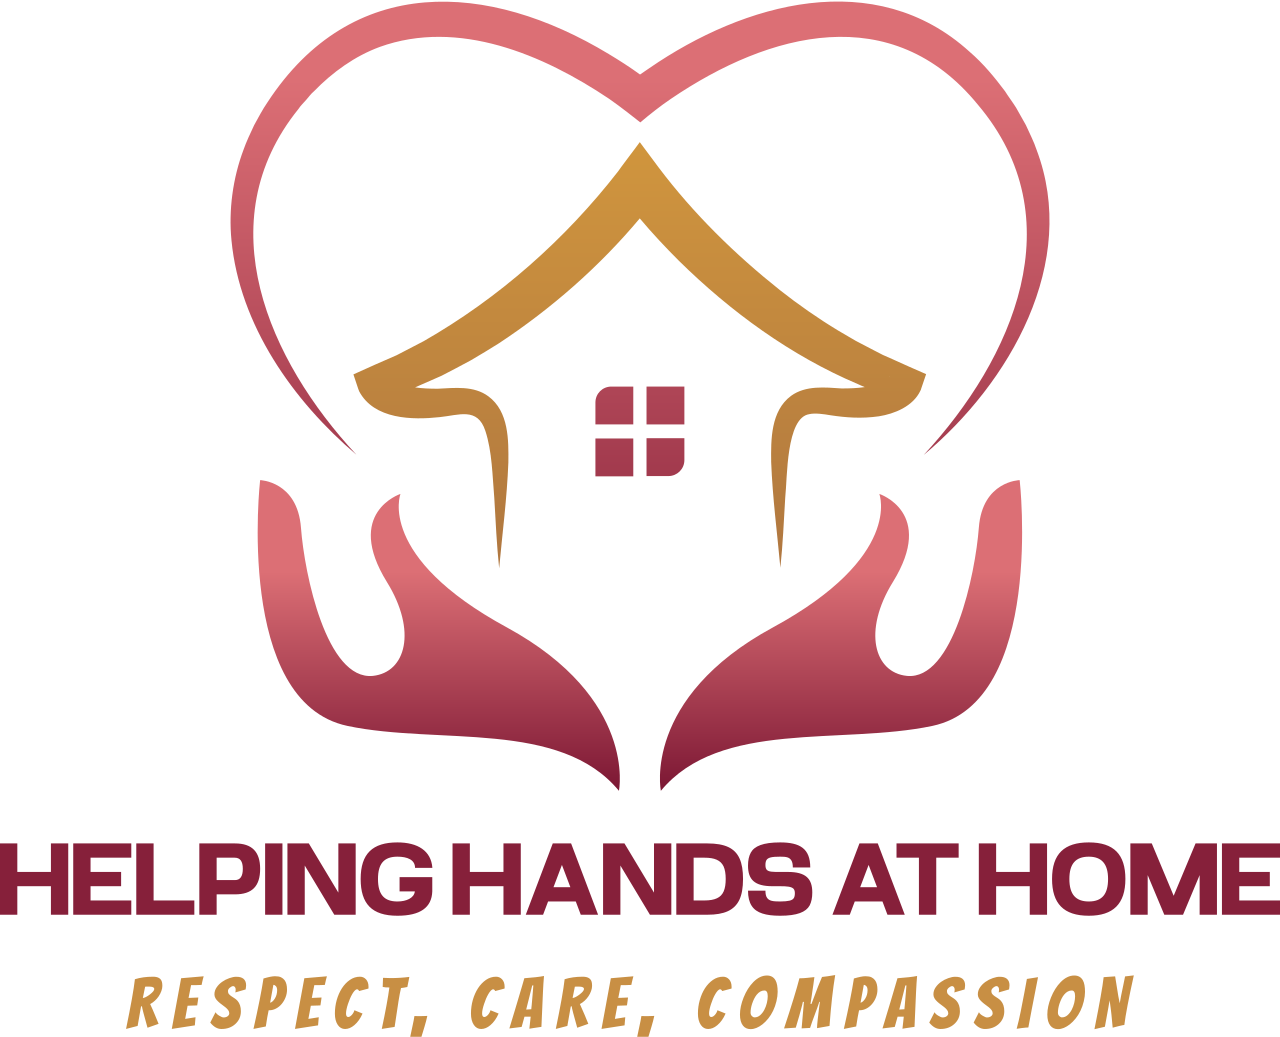 Helping Hands At Home's logo